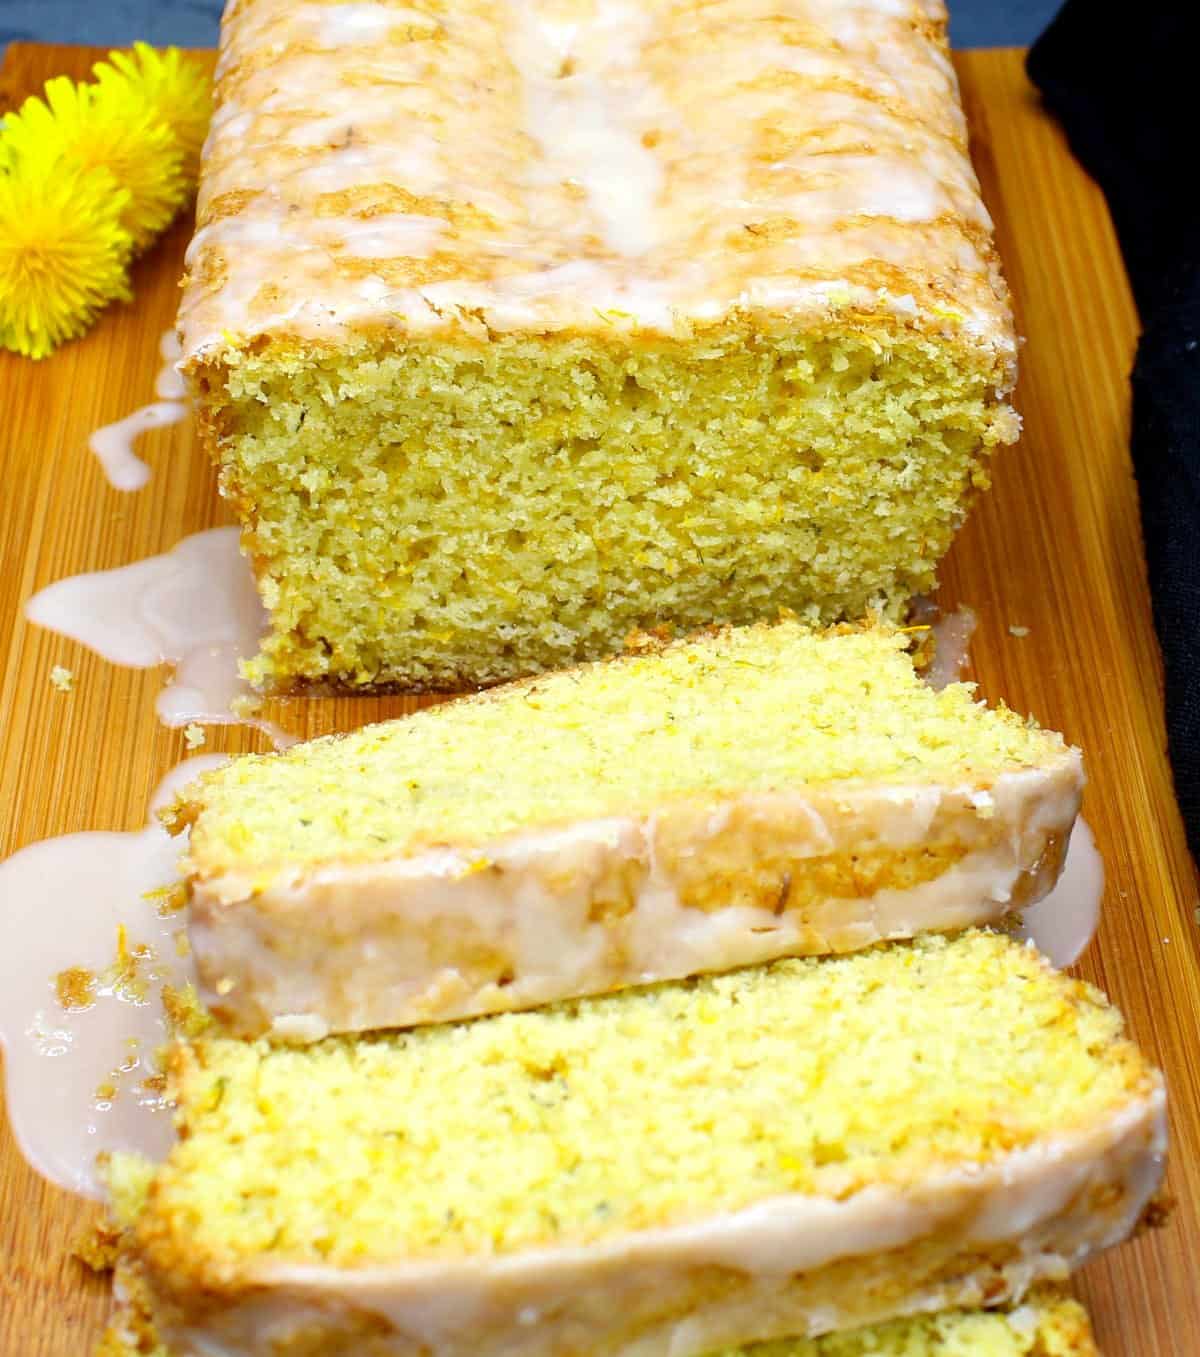 Sliced dandelion bread with lemon glaze on cutting board with the tender, cake-like crumb showing.